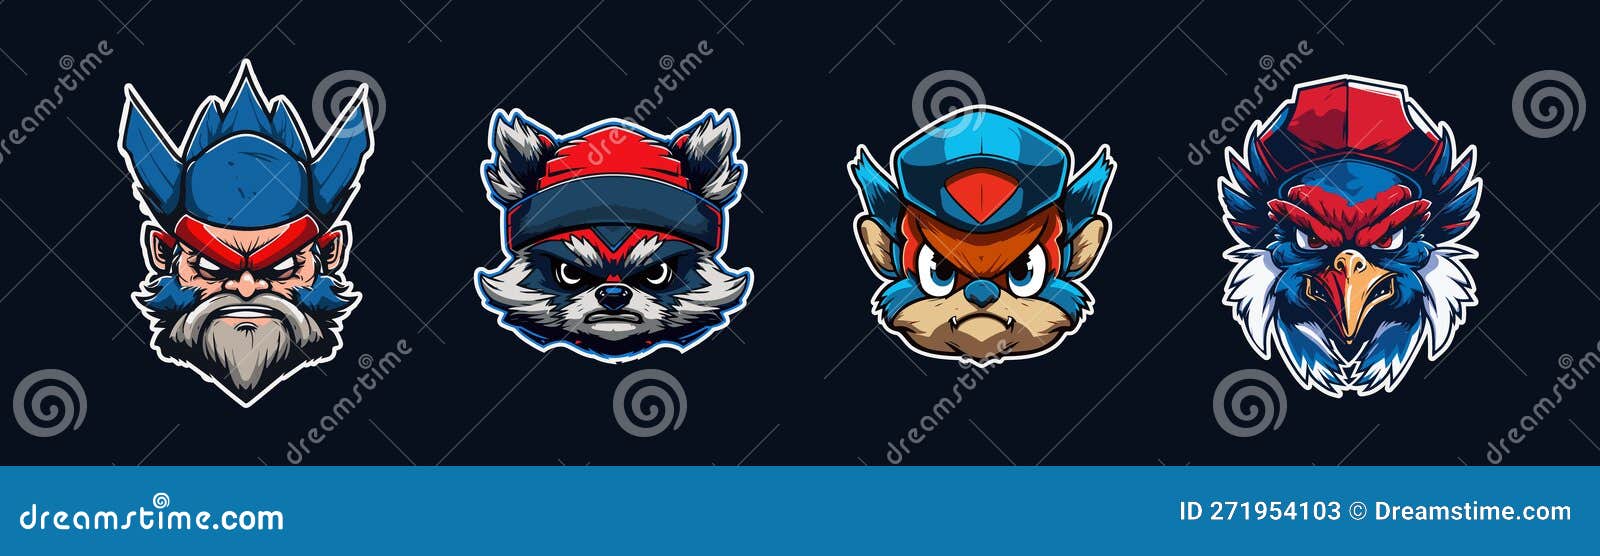 cartoon animal head, red and blue sport logo collection with white outlined. angry face of seahawk, raccon, maverick and